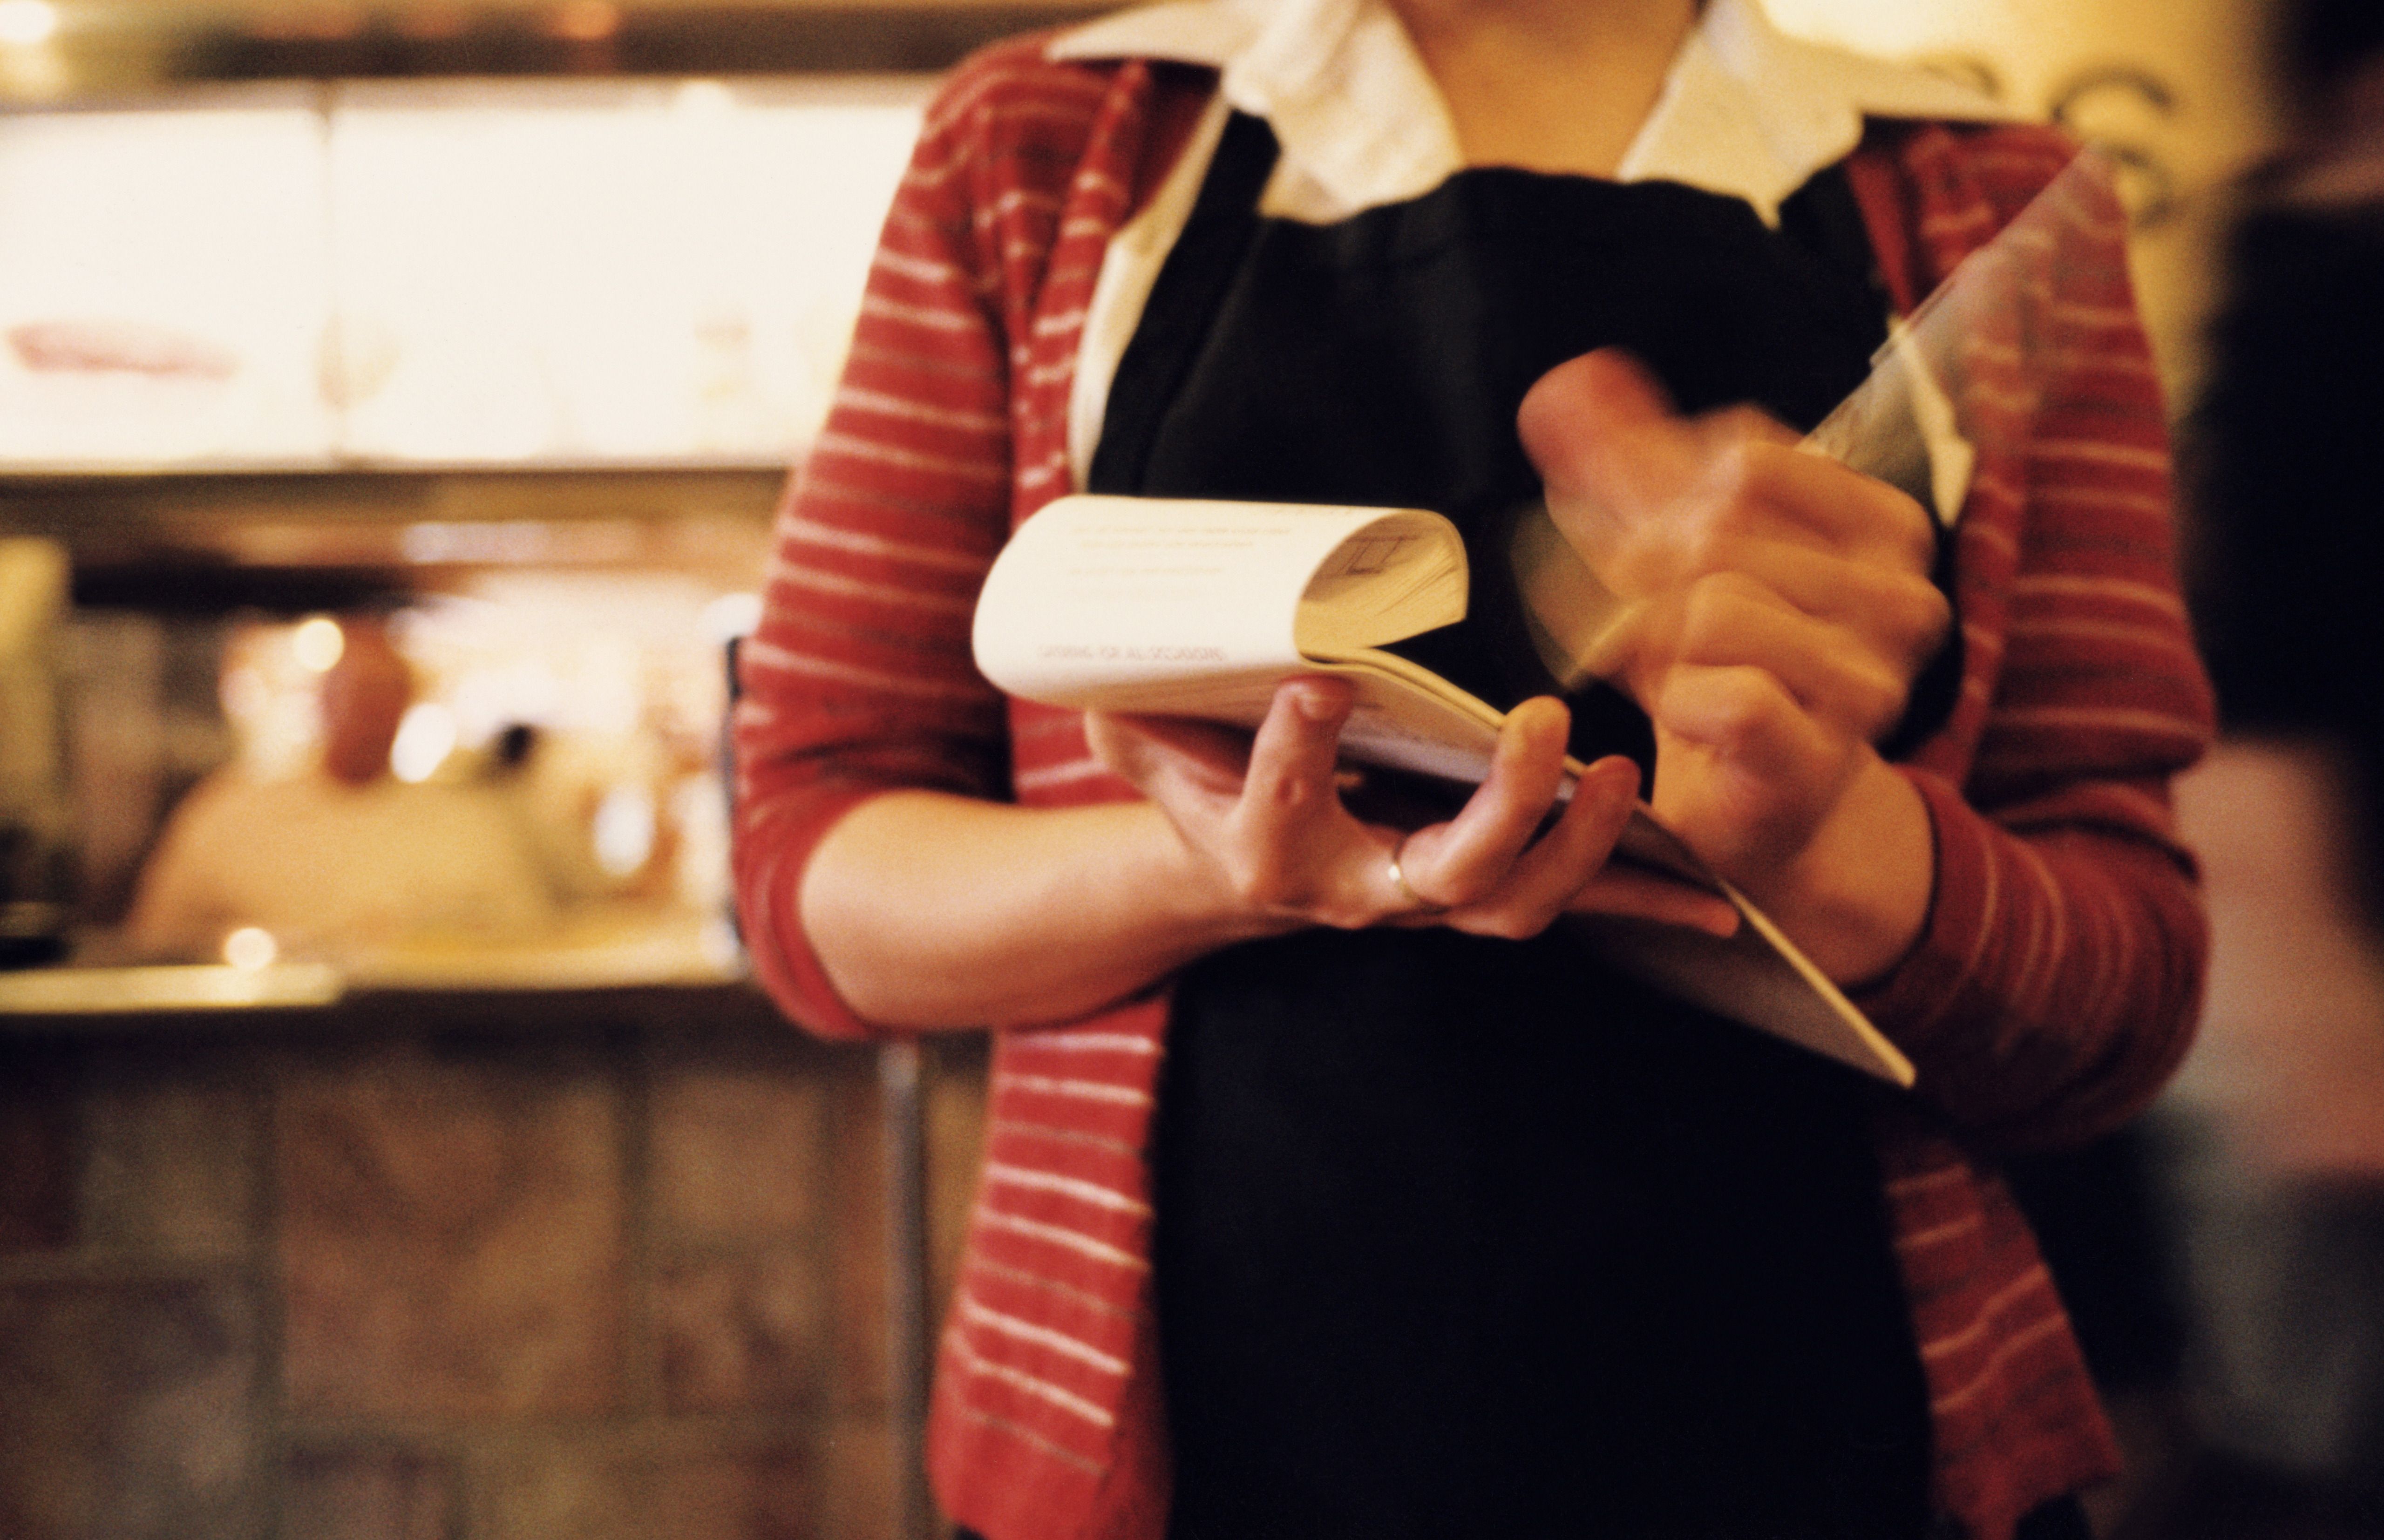 A waitress holding a receipt | Source: Getty Images